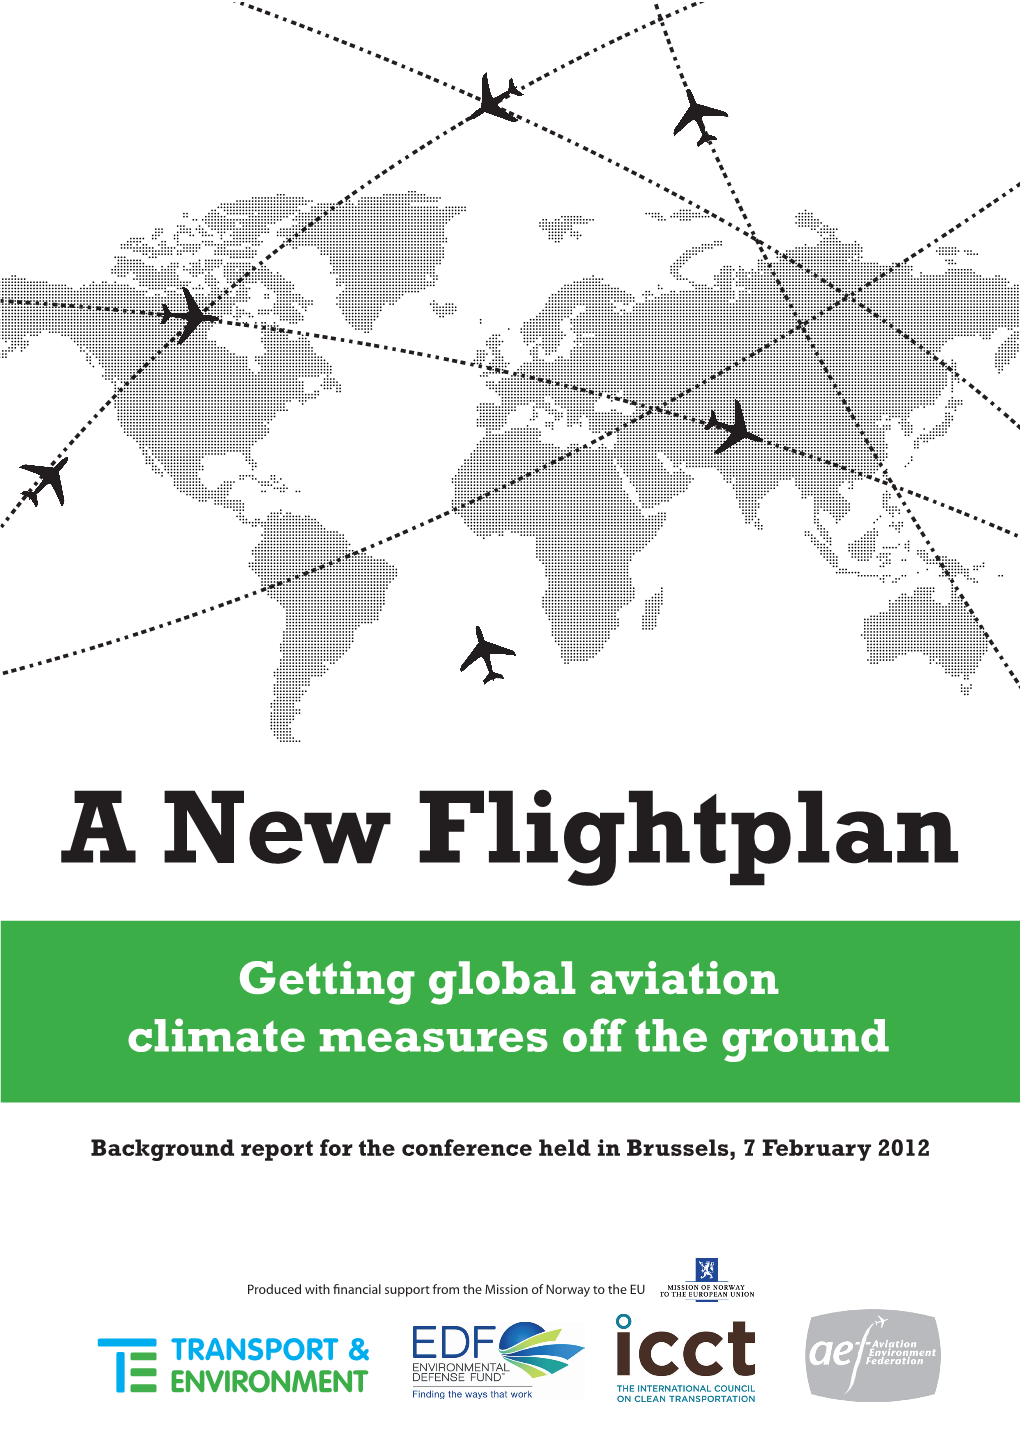 A New Flightplan: Getting Global Aviation Climate Measures Off The